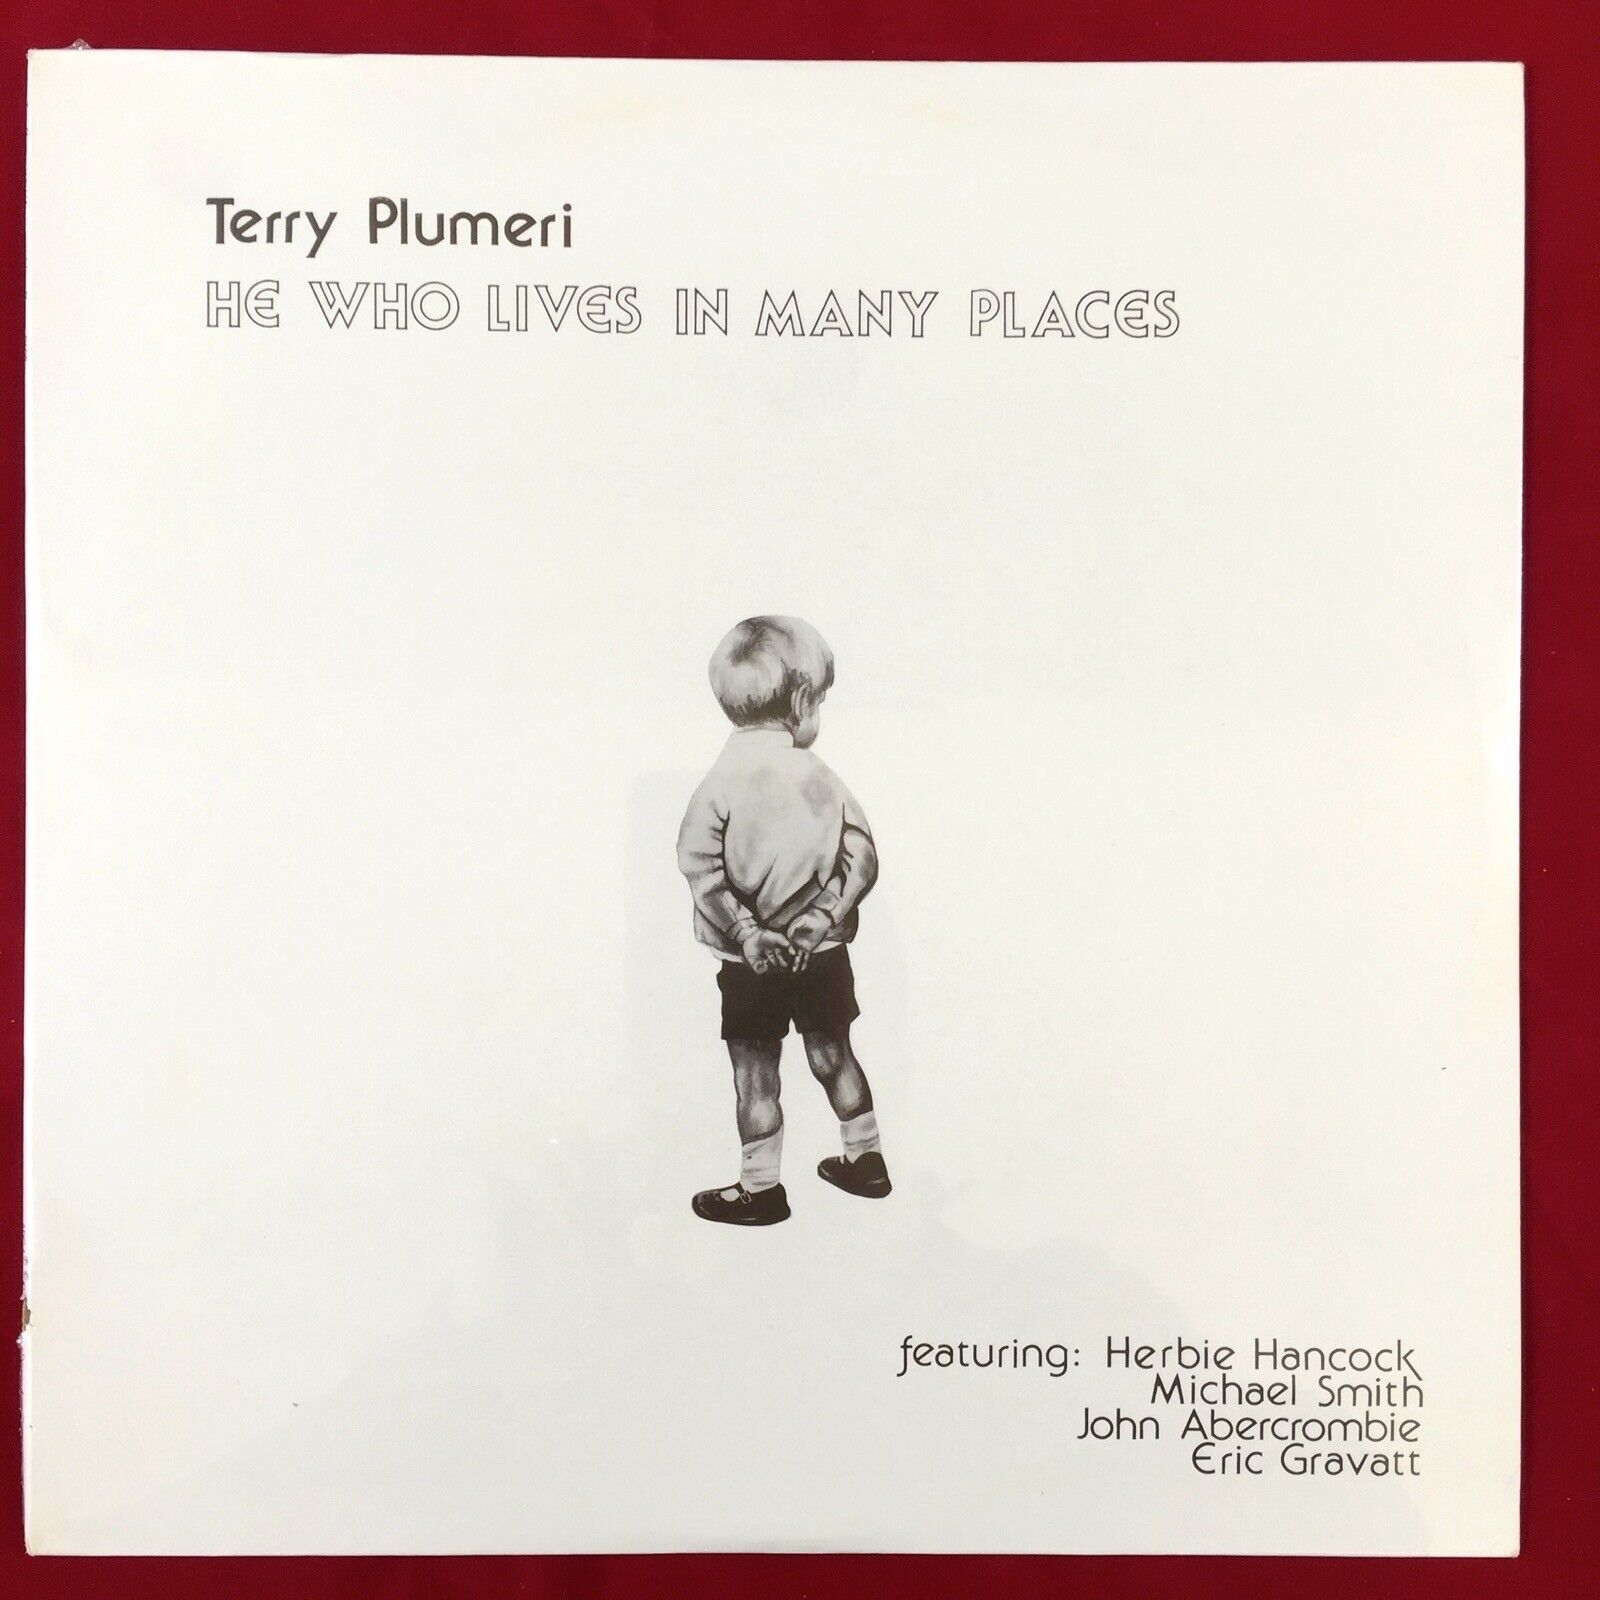 TERRY PLUMERI HERBIE HANCOCK JOHN ABERCROMBIE He Who Lives In Many Places LP RVG